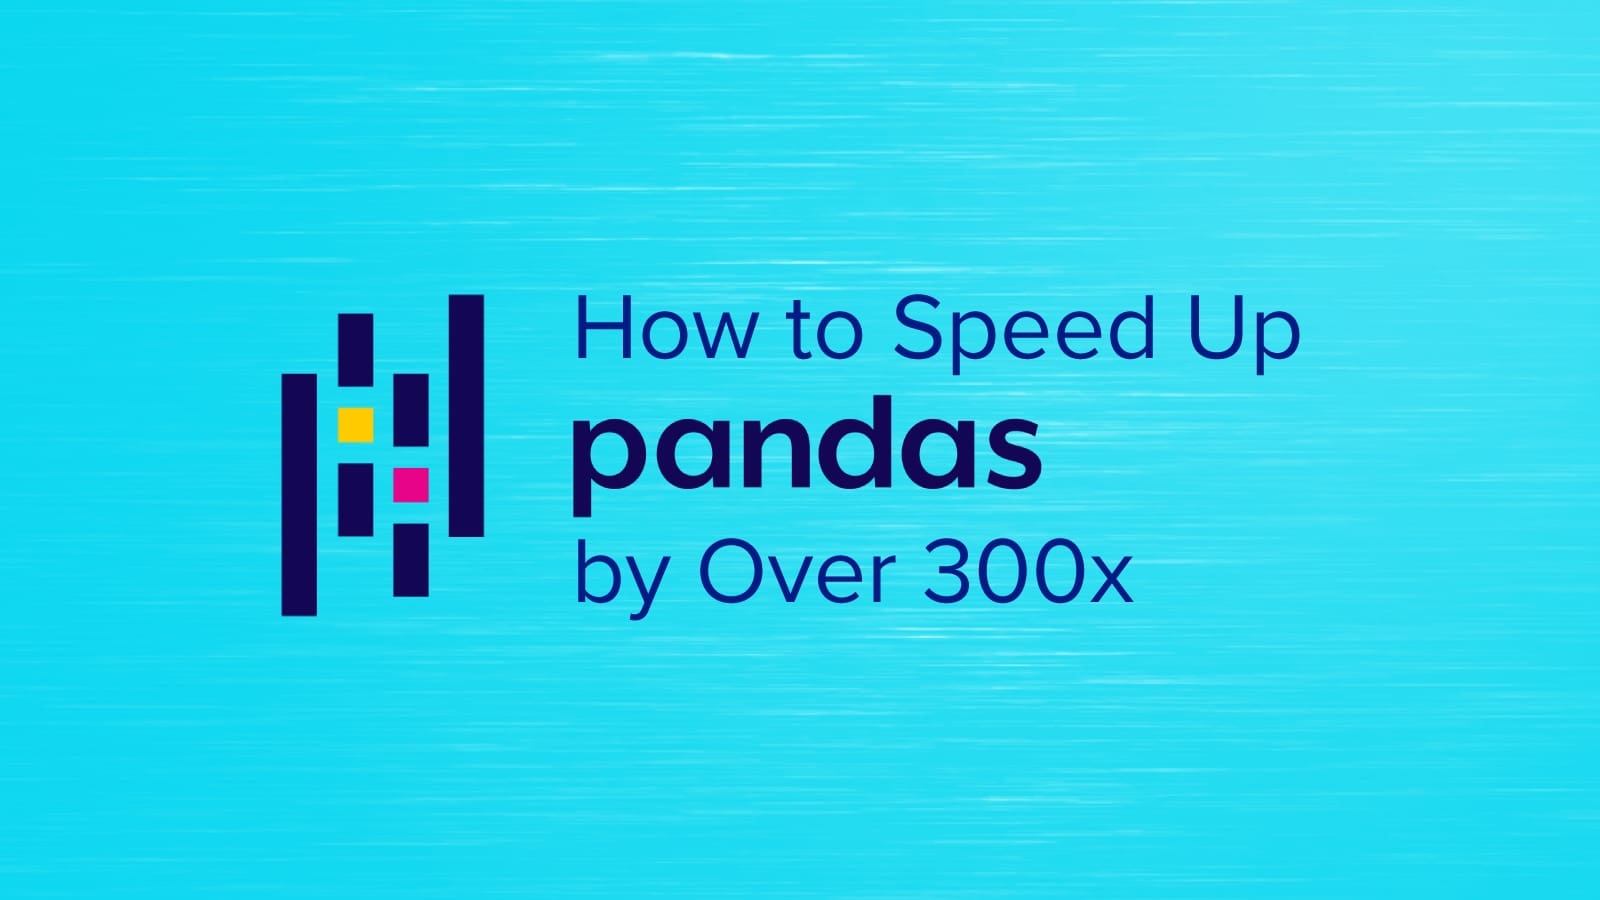 How one can Velocity Up Python Pandas by Over 300x